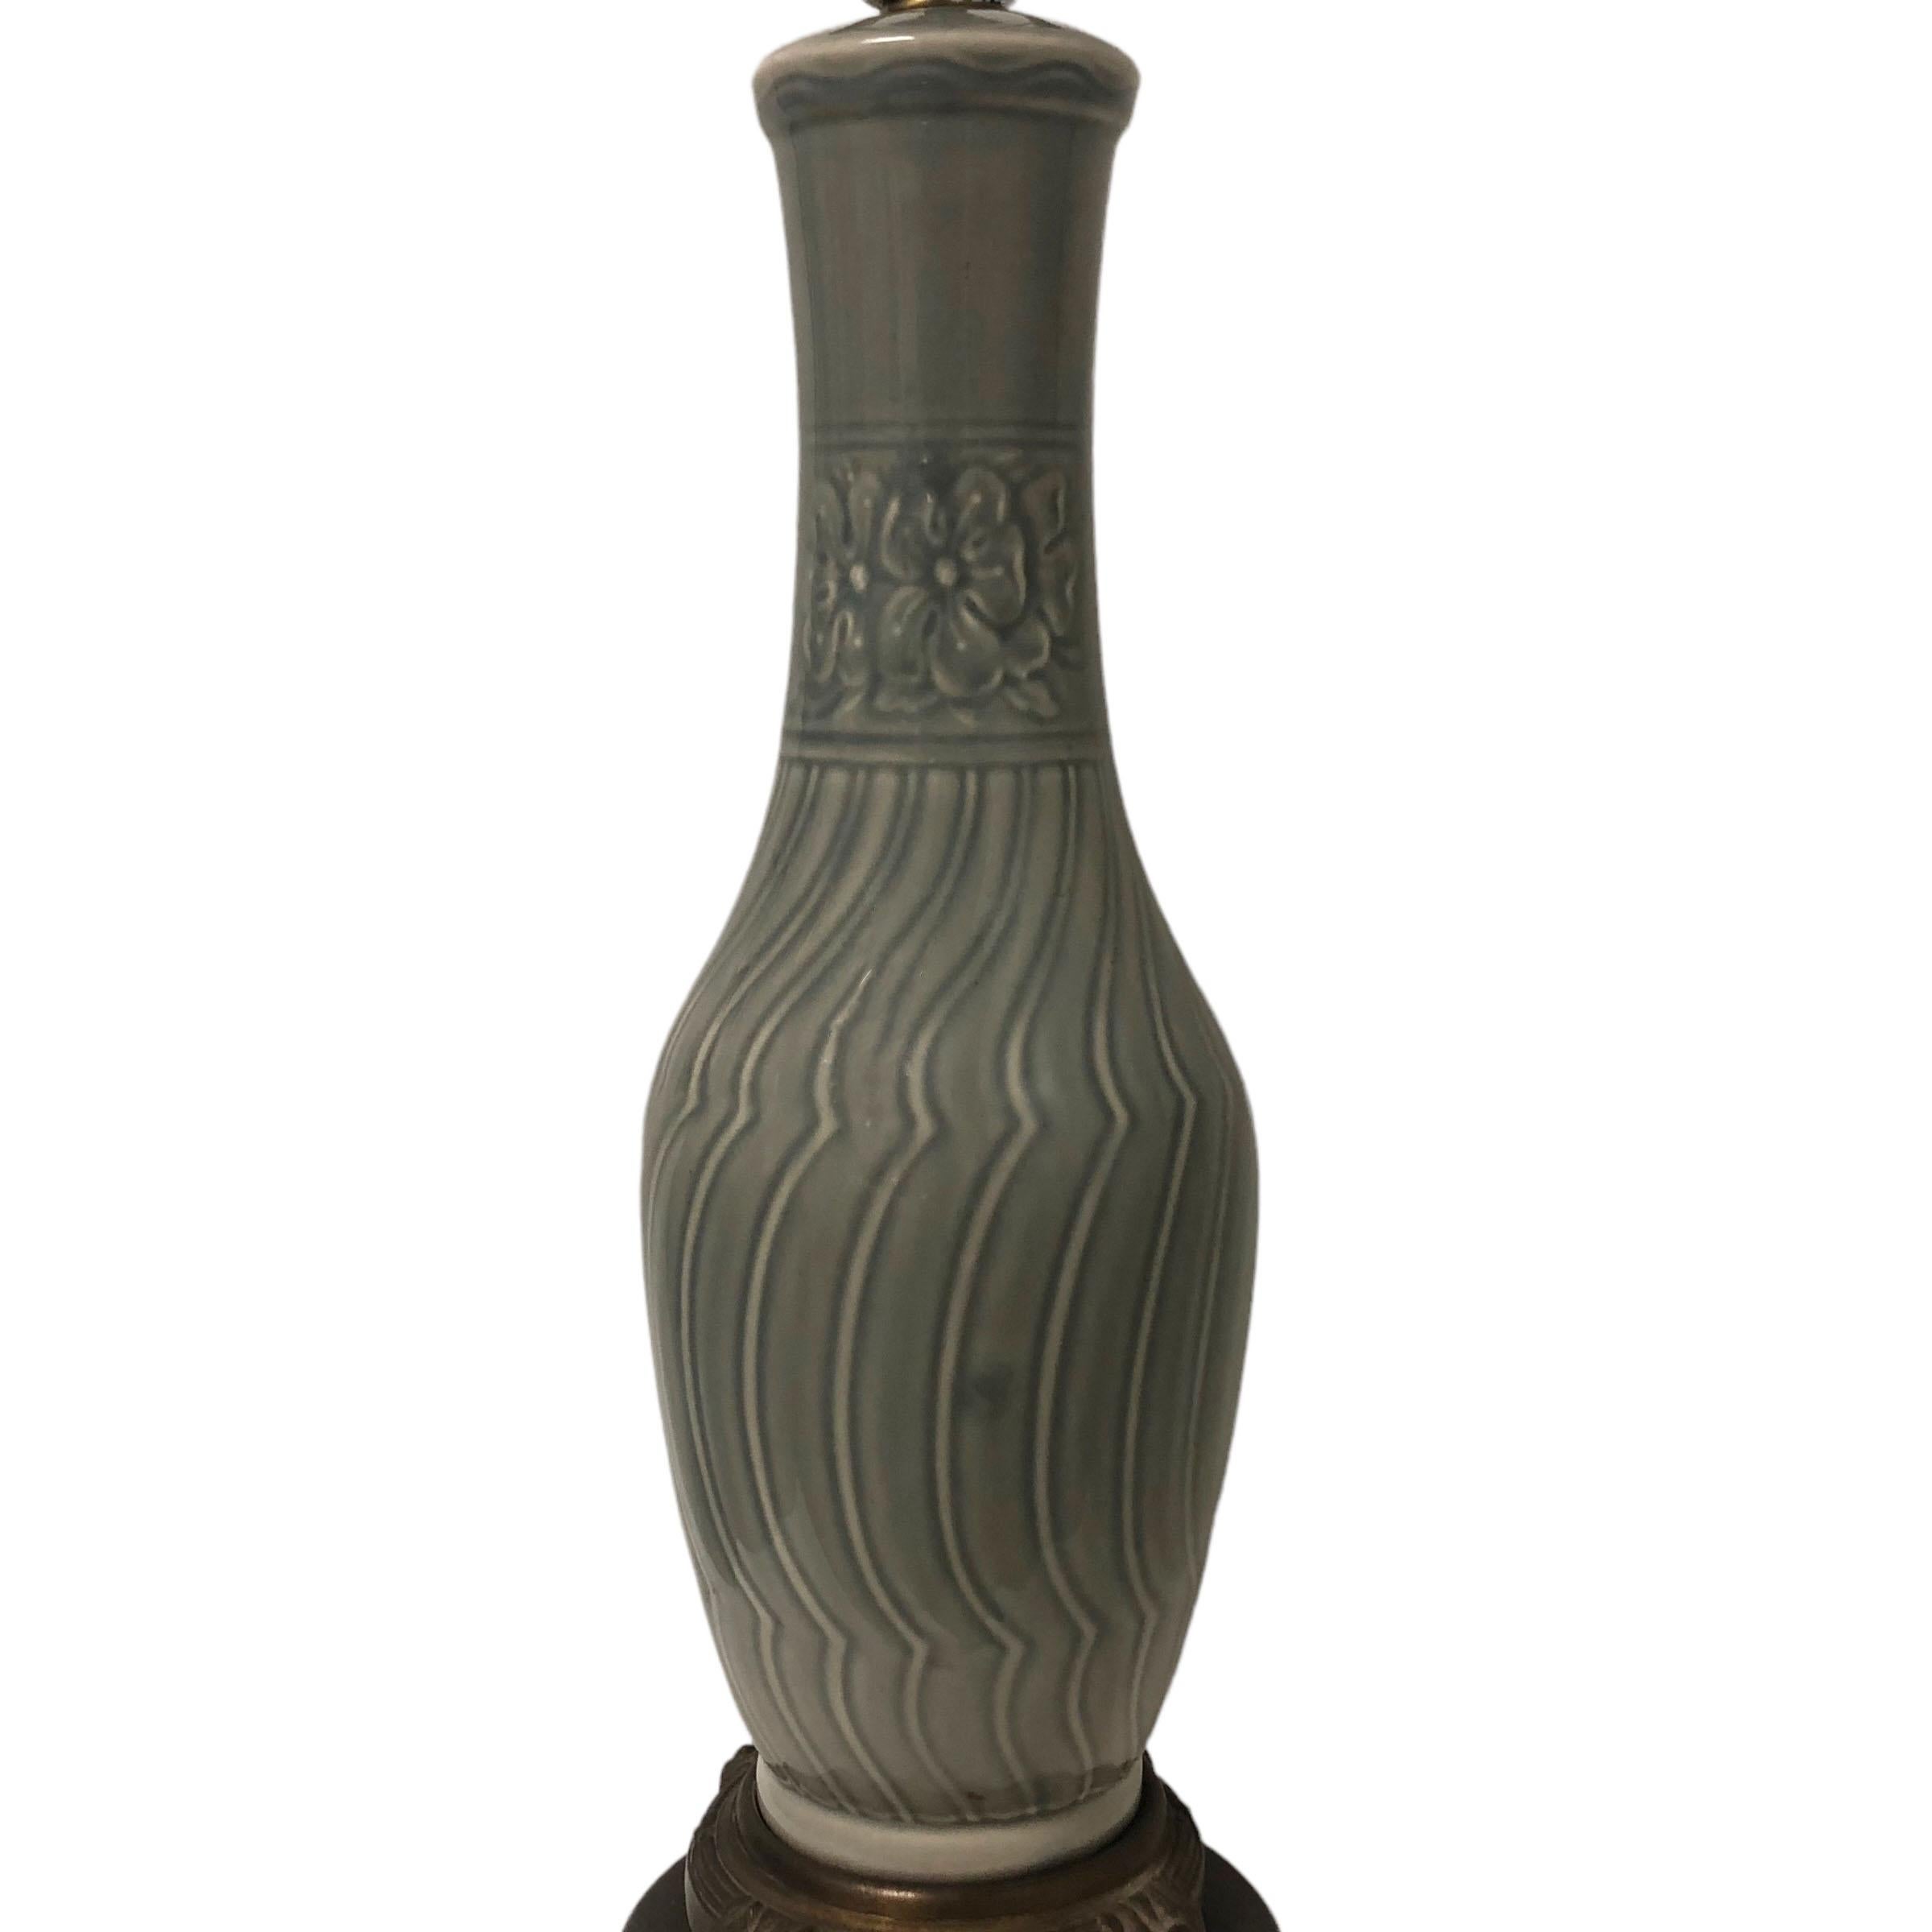 A celadon color lamp in the Chinese taste and form. The base is staggered bronze in the French taste. It is a very nice porcelain lamp in good working condition for the age and does have a finial. American from the 1920s.